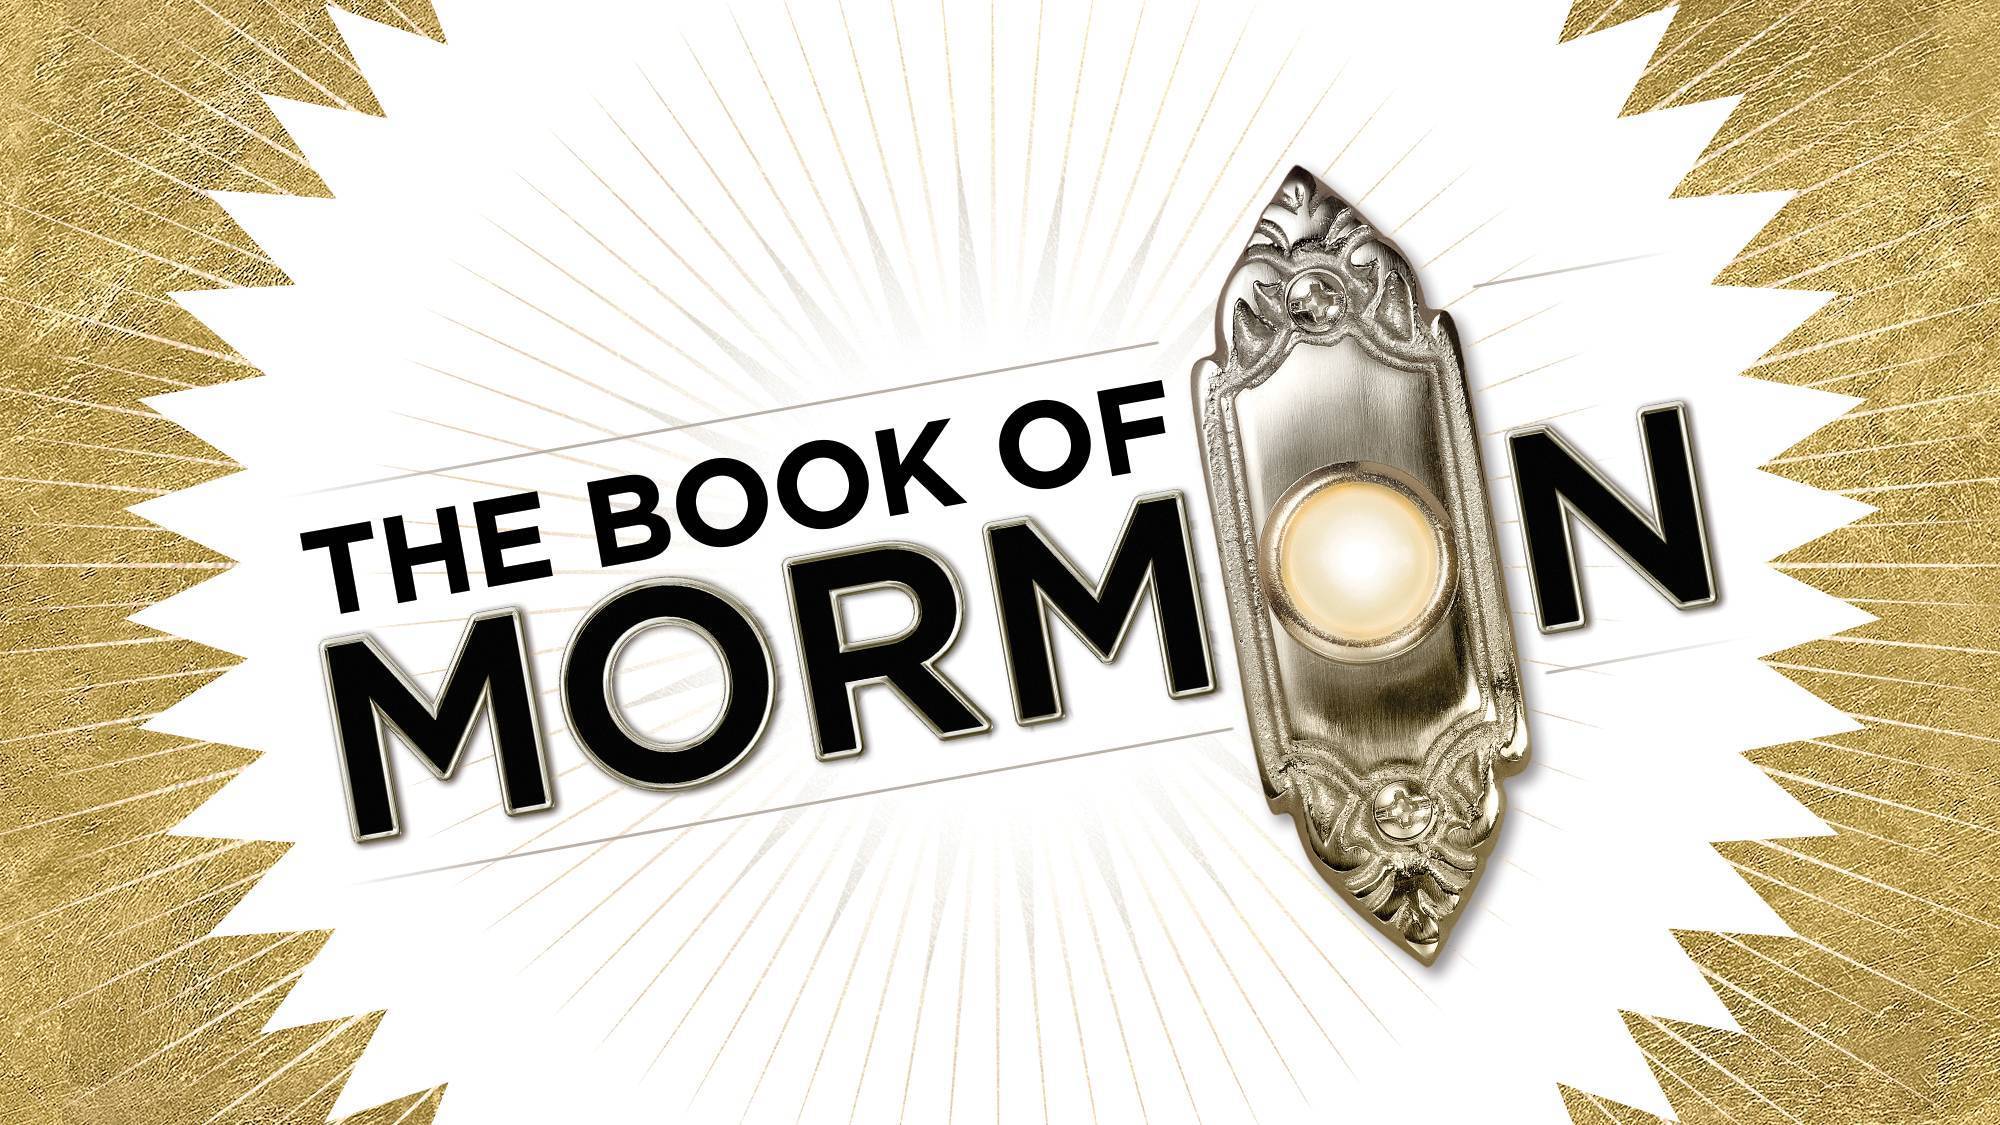 Is The Book of Mormon Scripture or not Scripture?